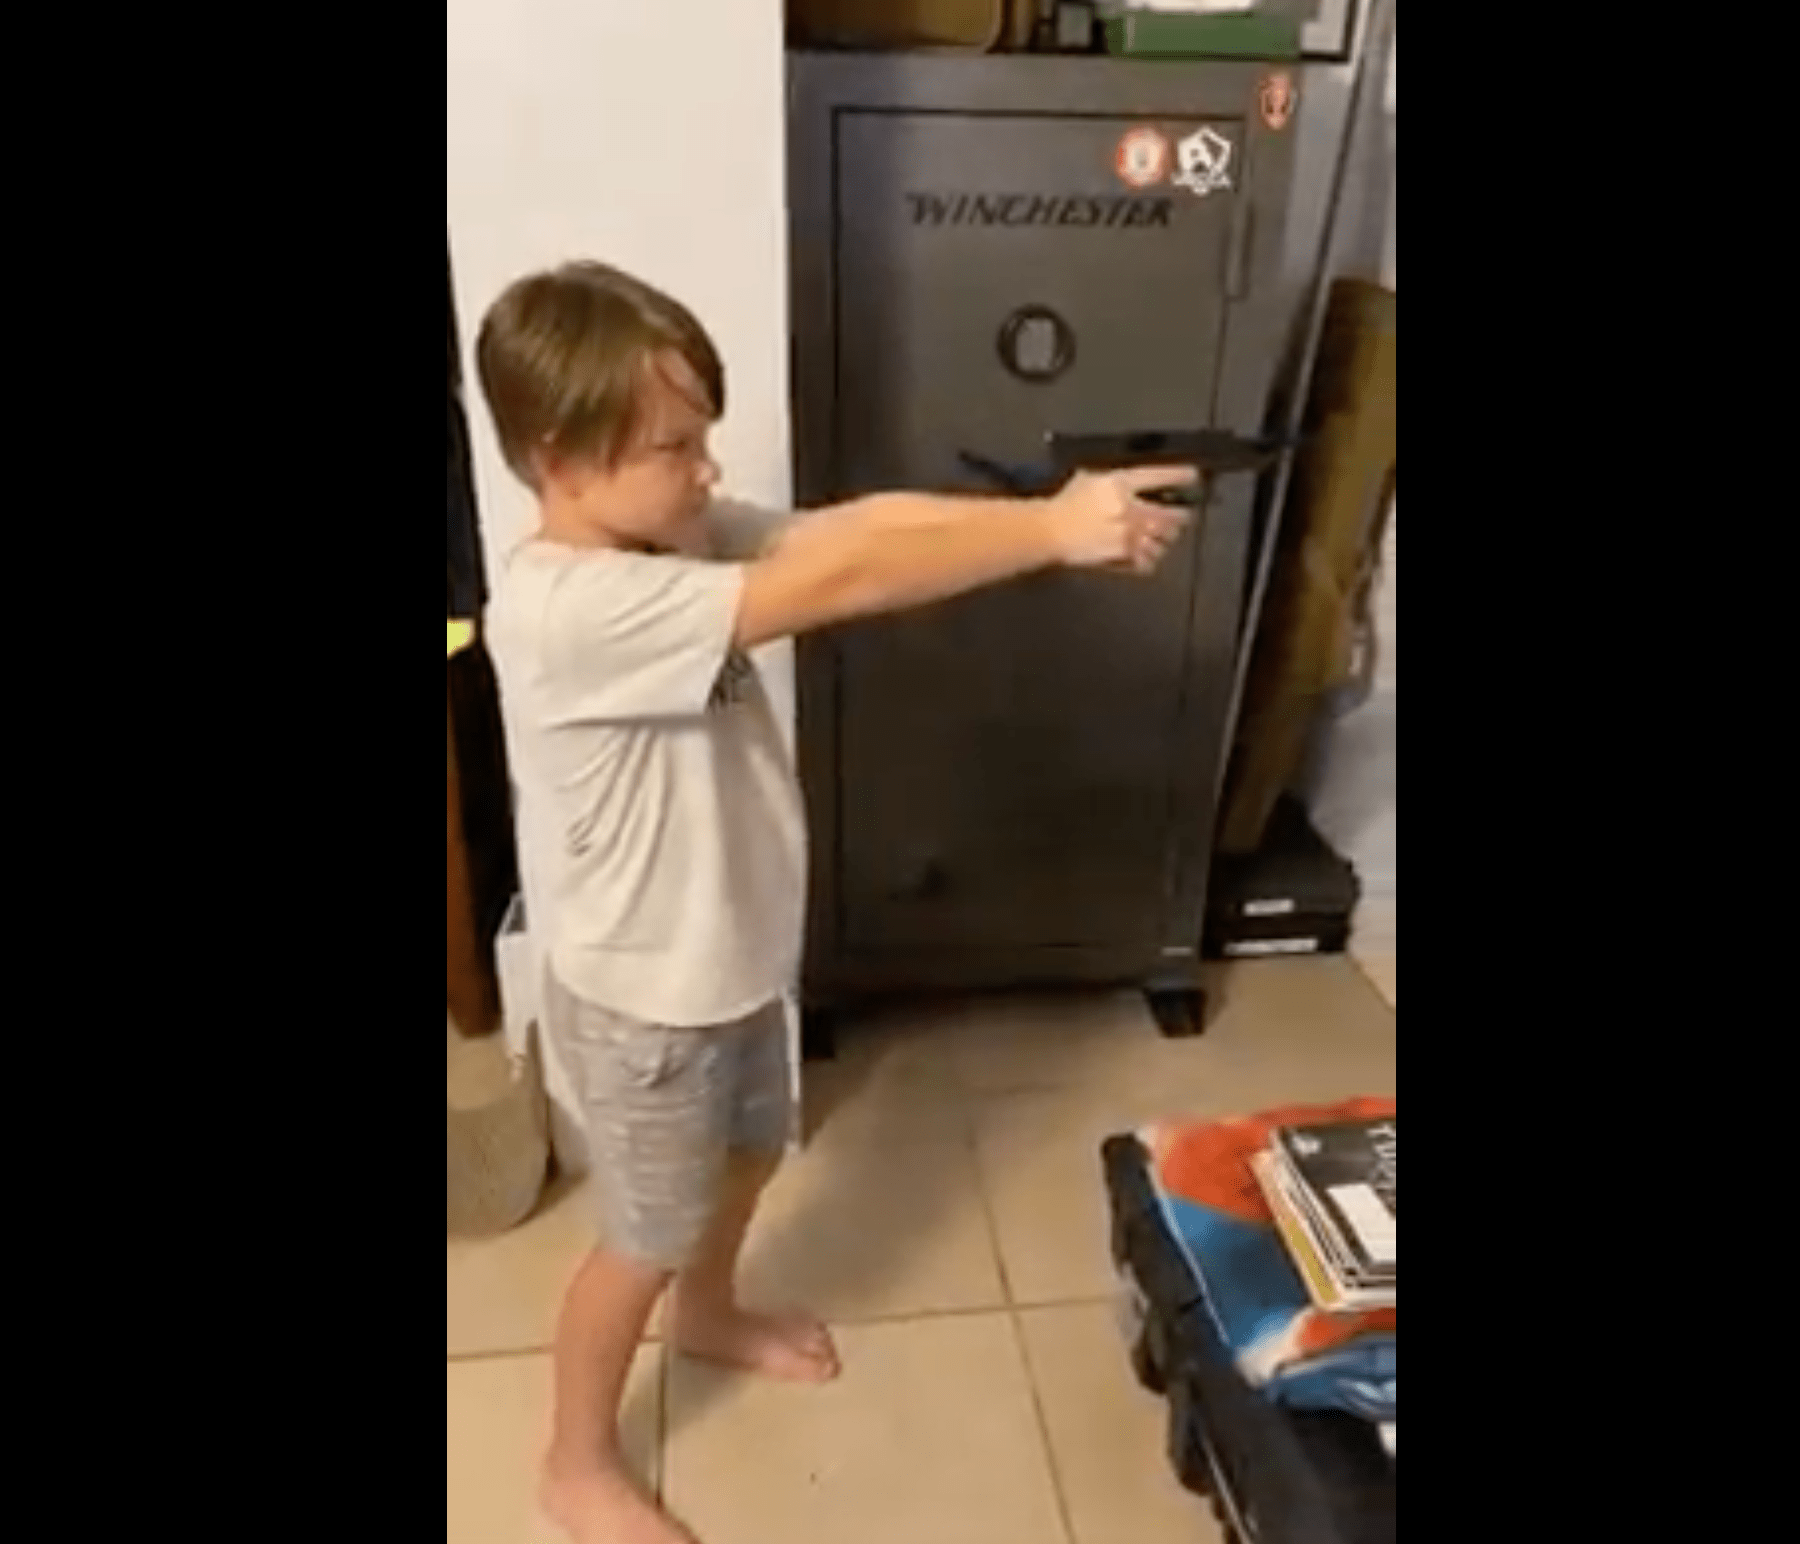 Boy holding gun practicing grip and stance indoors in front of safe